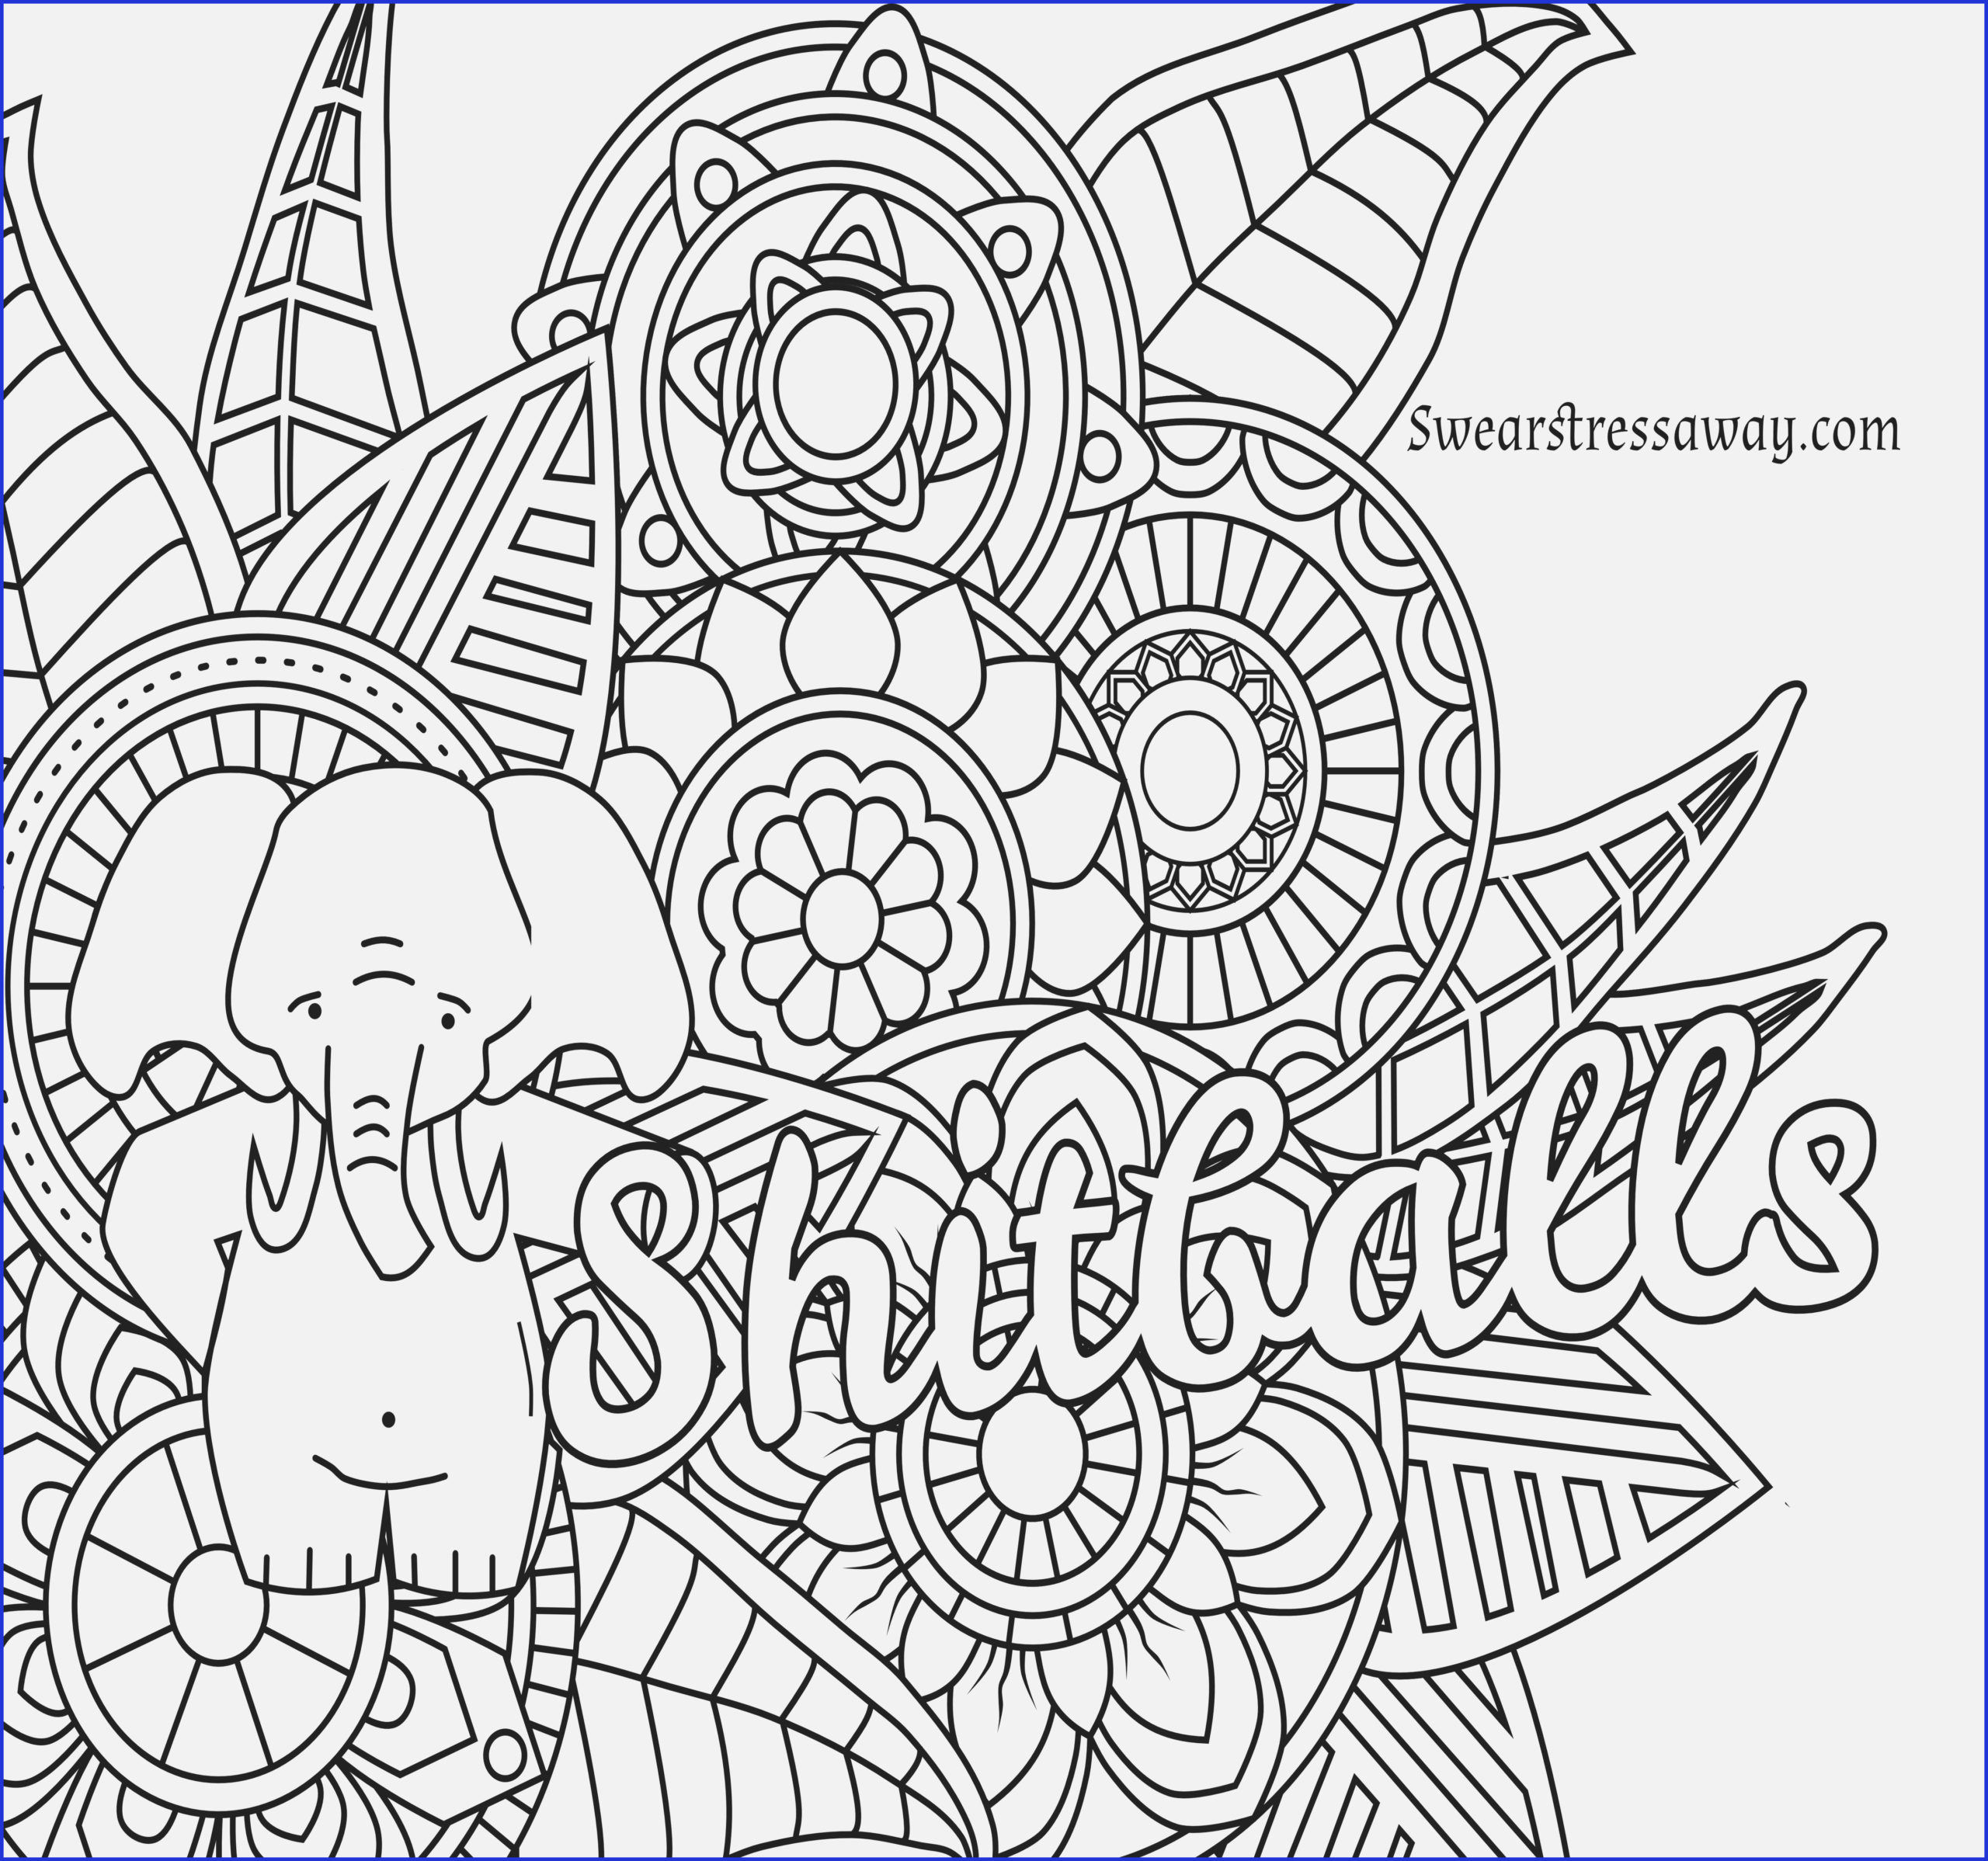 Coloring : Pages Happystard Swear Word Page Cussook Printable Pdf Free  Spanish List The Book Happy Bstard Cuss Mandala For Adults Adult Sheets  David And Goliath Pictures 49 Marvelous ~ Americangrassrootscoalition